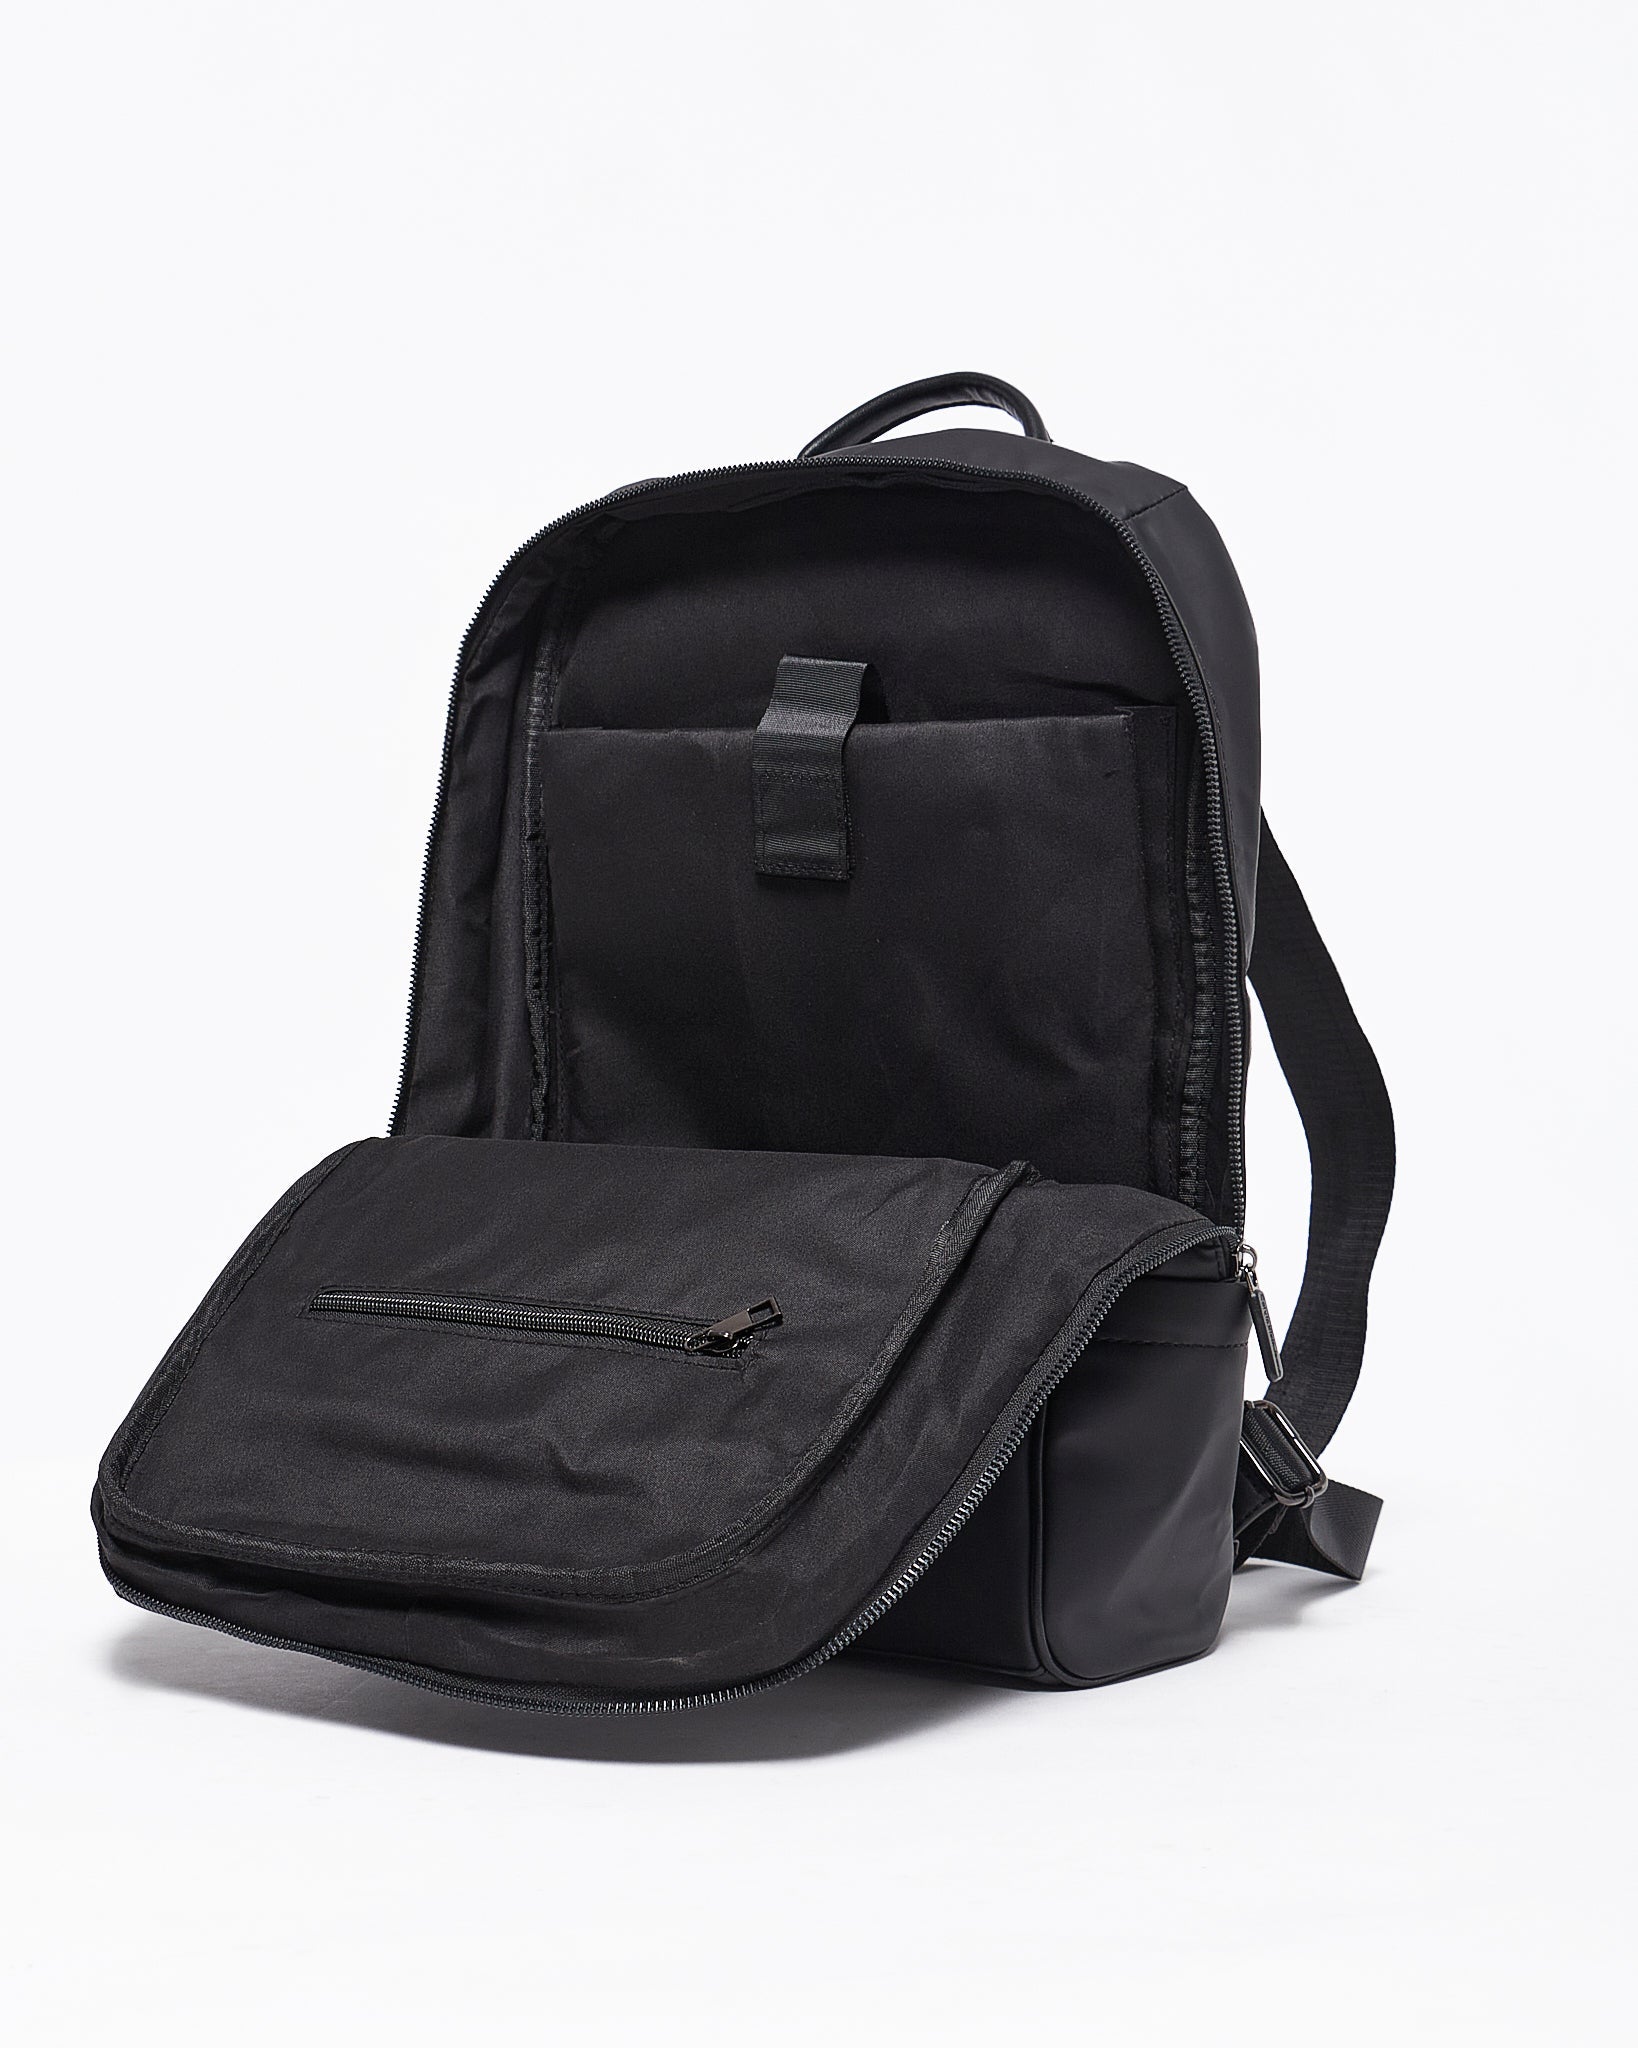 MOI OUTFIT-CK Men Backpack 34.90